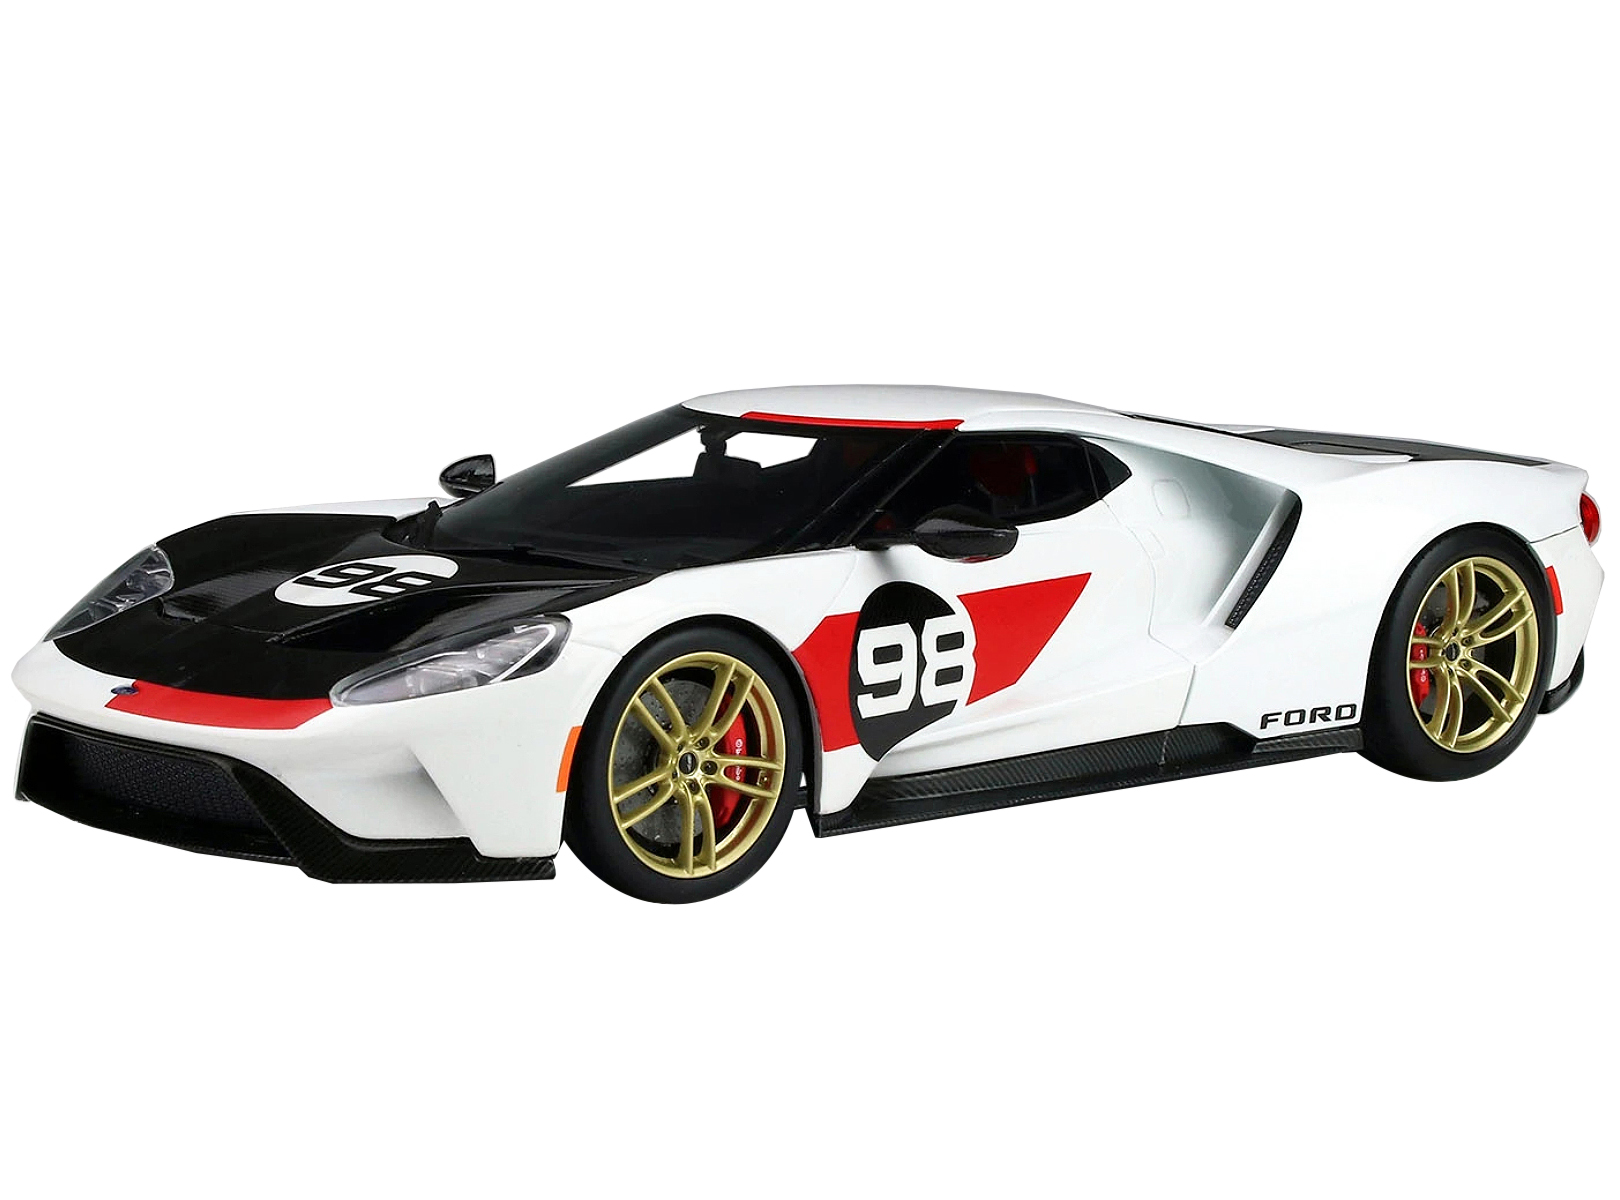 Image of 2021 Ford GT 98 White with Black Hood "1966 Daytona 24 Hours" Heritage Edition 1/18 Model Car by GT Spirit for ACME